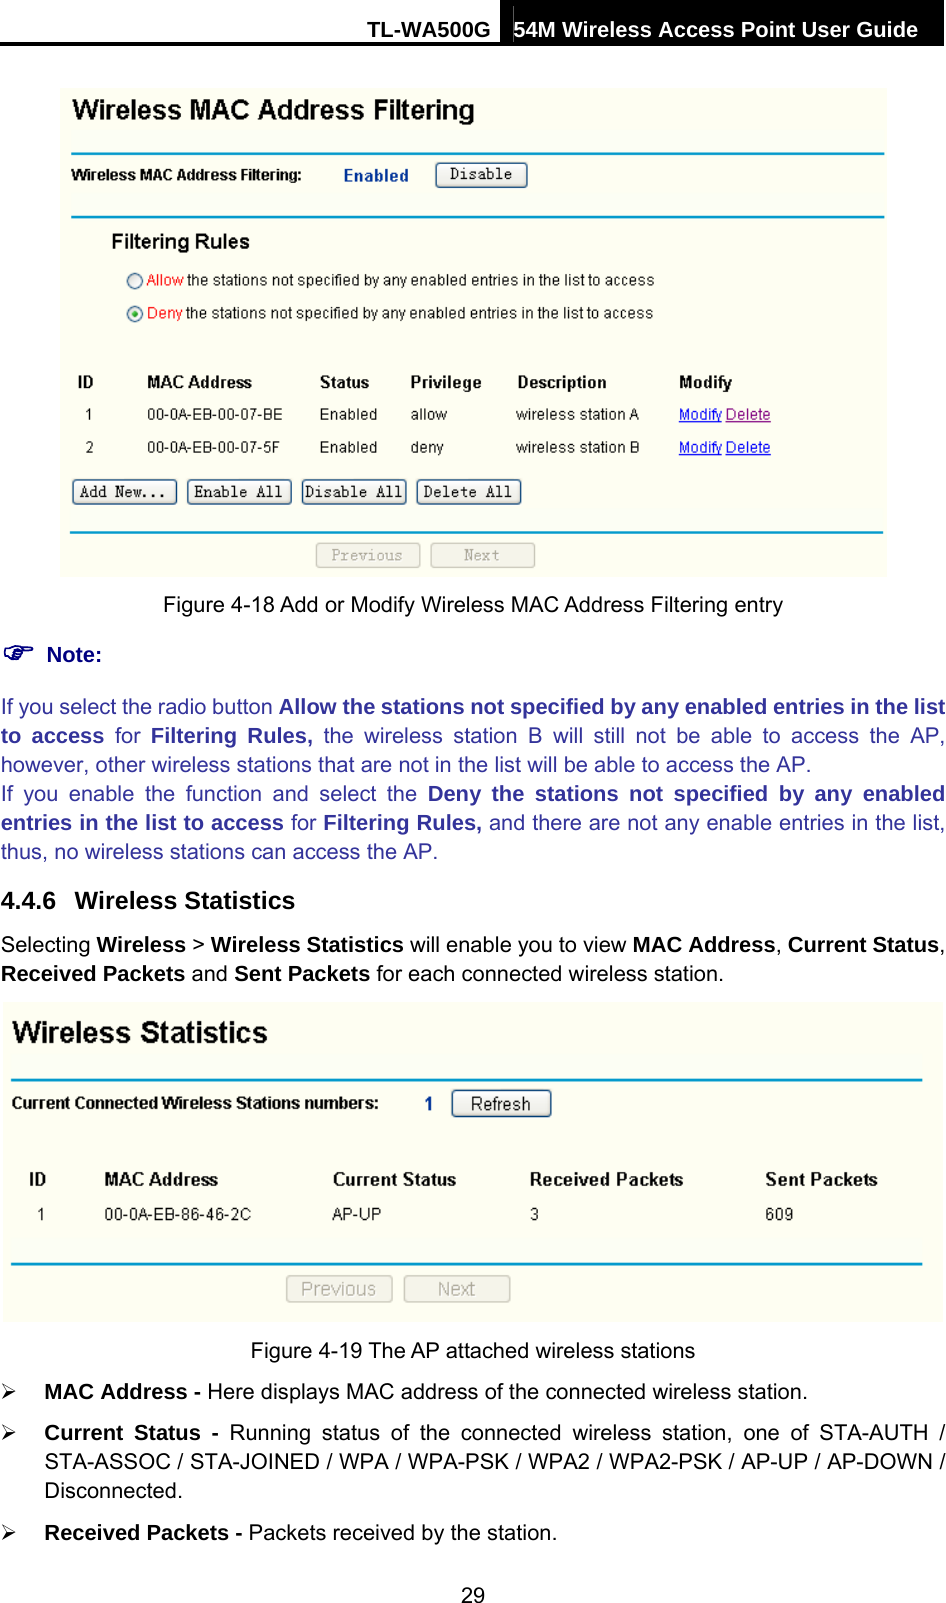 TL-WA500G 54M Wireless Access Point User Guide   Figure 4-18 Add or Modify Wireless MAC Address Filtering entry ) Note: If you select the radio button Allow the stations not specified by any enabled entries in the list to access for Filtering Rules, the wireless station B will still not be able to access the AP, however, other wireless stations that are not in the list will be able to access the AP. If you enable the function and select the Deny the stations not specified by any enabled entries in the list to access for Filtering Rules, and there are not any enable entries in the list, thus, no wireless stations can access the AP. 4.4.6  Wireless Statistics Selecting Wireless &gt; Wireless Statistics will enable you to view MAC Address, Current Status, Received Packets and Sent Packets for each connected wireless station.  Figure 4-19 The AP attached wireless stations ¾ MAC Address - Here displays MAC address of the connected wireless station. ¾ Current Status - Running status of the connected wireless station, one of STA-AUTH / STA-ASSOC / STA-JOINED / WPA / WPA-PSK / WPA2 / WPA2-PSK / AP-UP / AP-DOWN / Disconnected. ¾ Received Packets - Packets received by the station. 29 